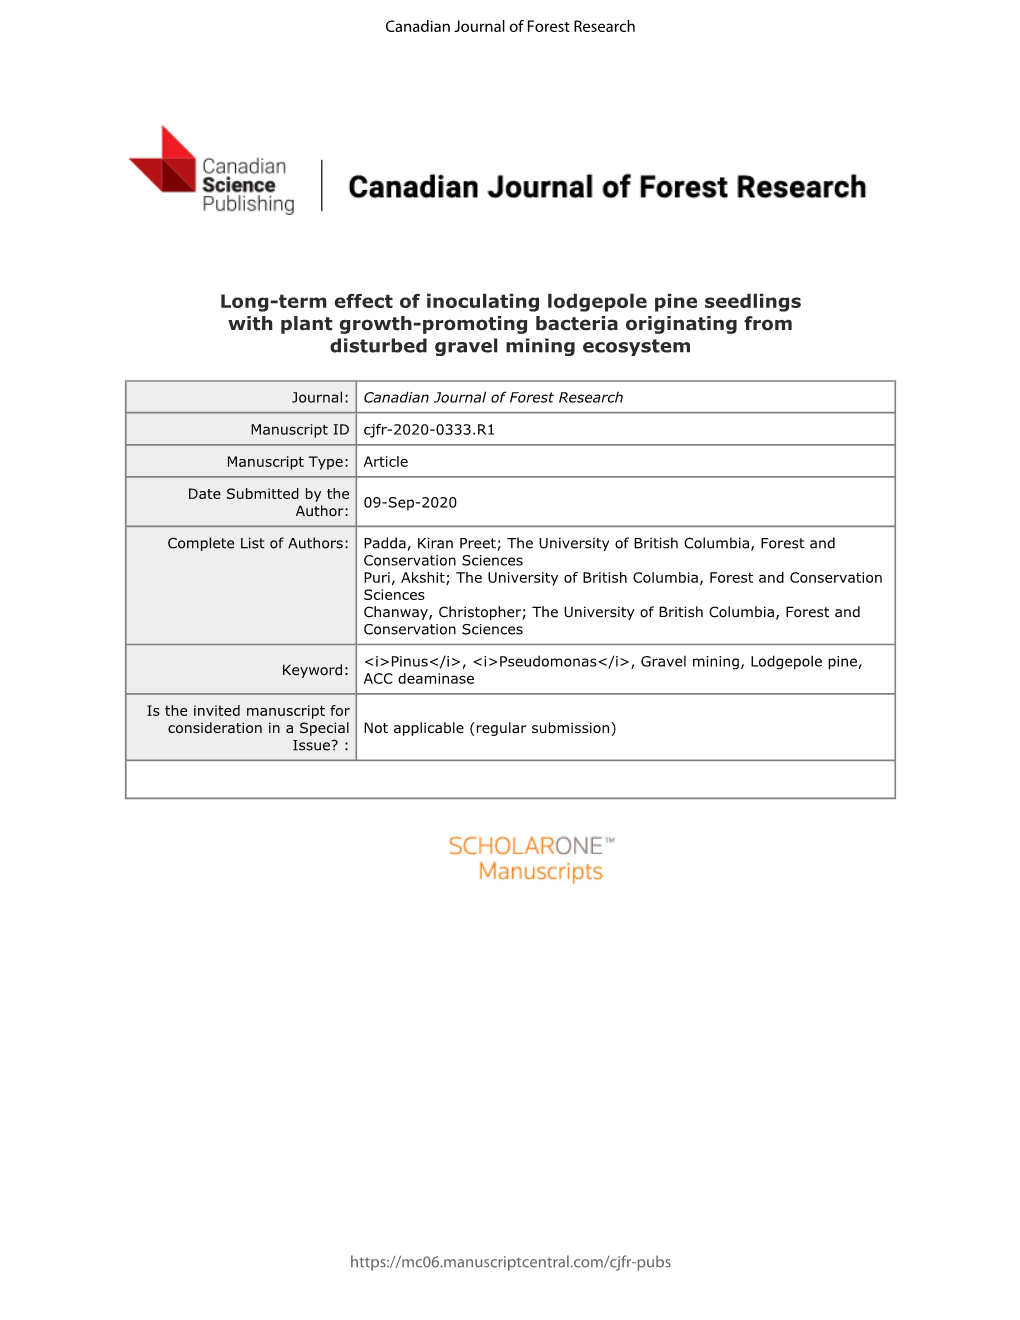 Long-Term Effect of Inoculating Lodgepole Pine Seedlings with Plant Growth-Promoting Bacteria Originating from Disturbed Gravel Mining Ecosystem